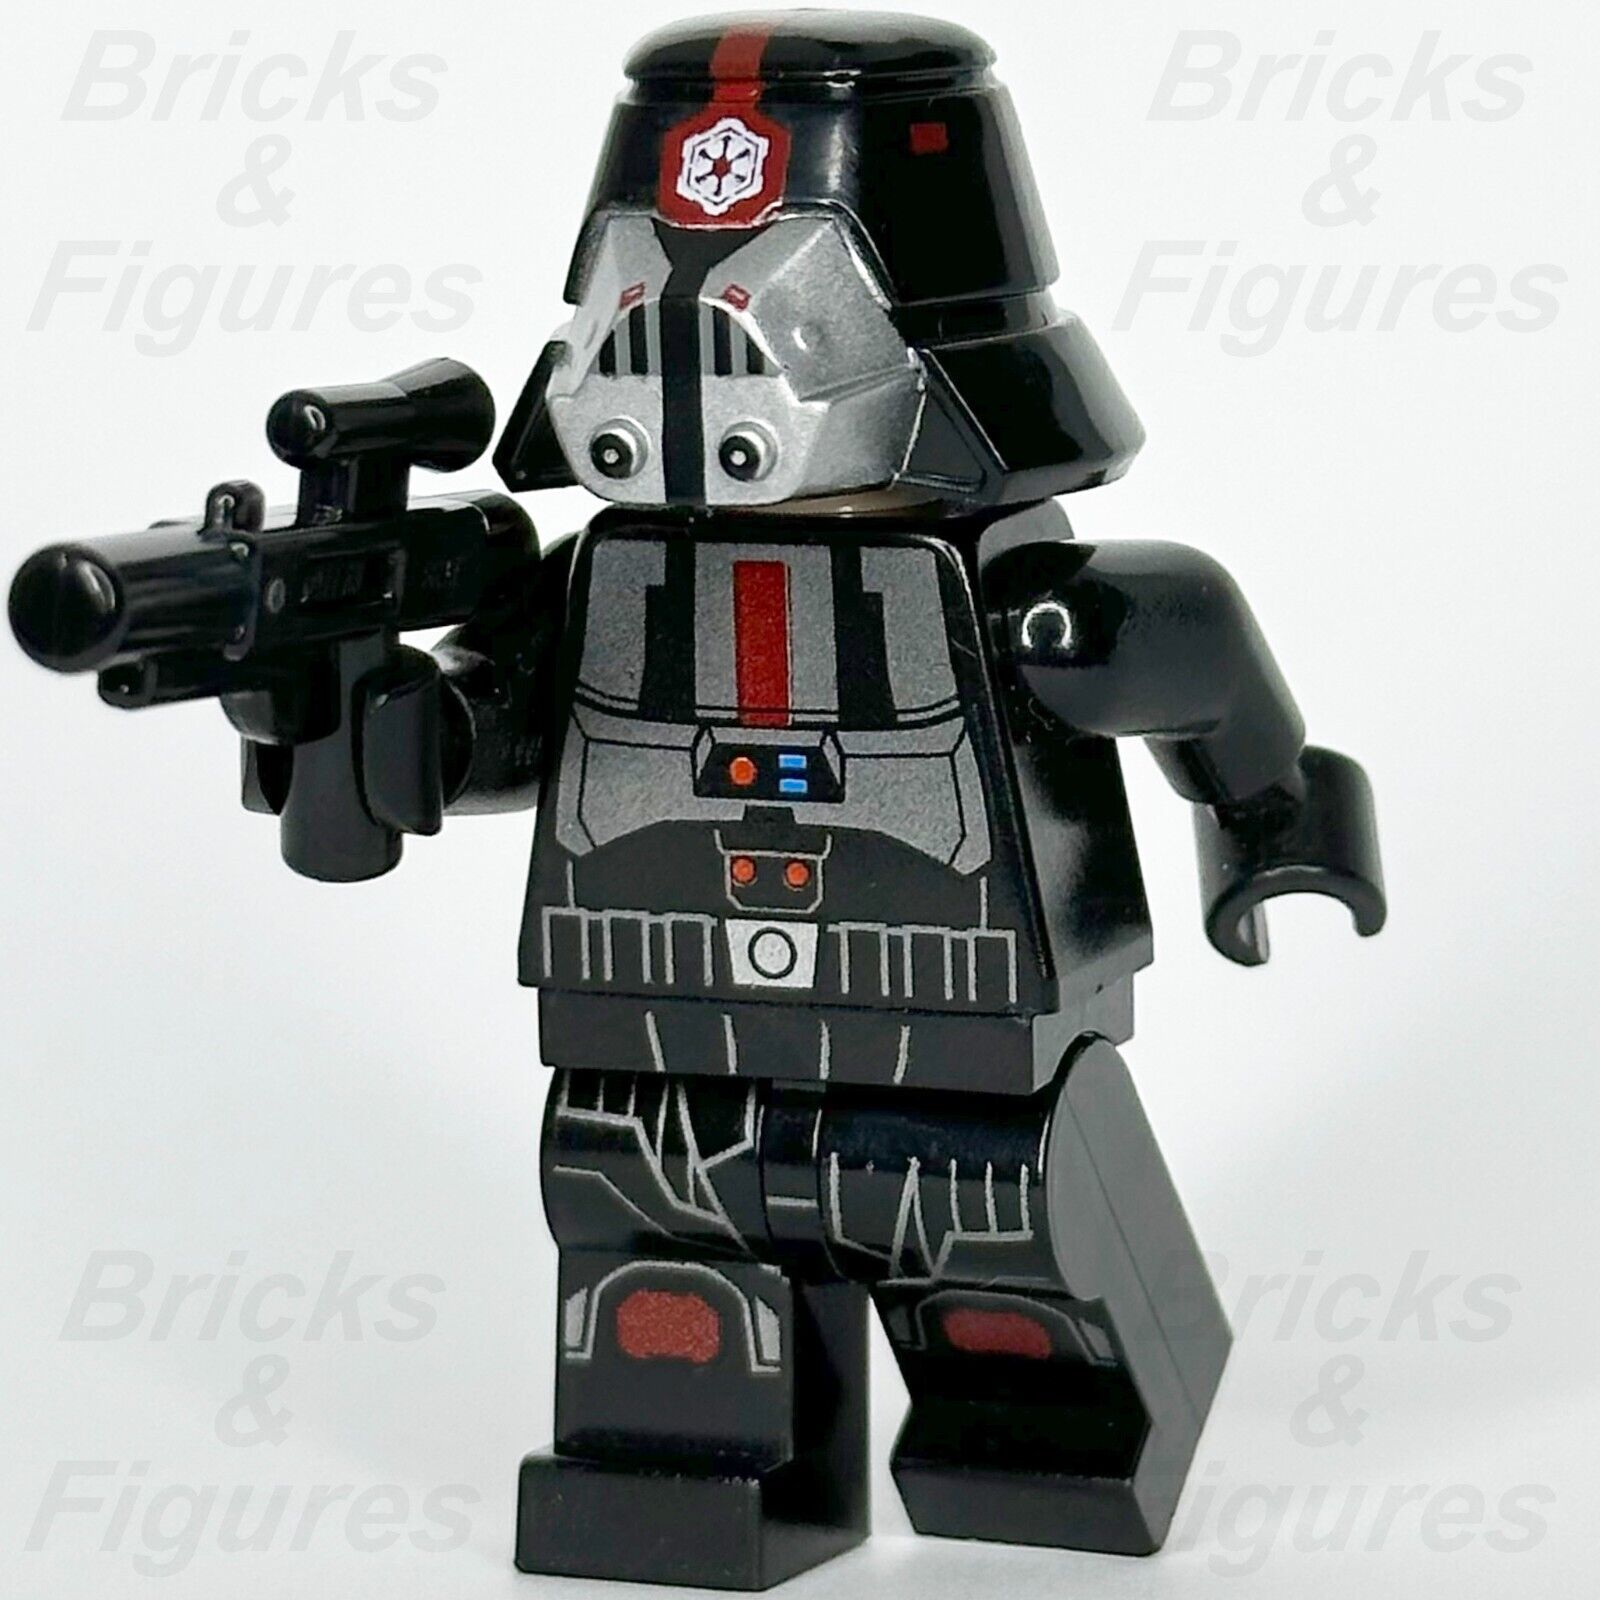 LEGO Star Wars Sith Trooper Minifigure The Old Republic 75001 75025 sw0443